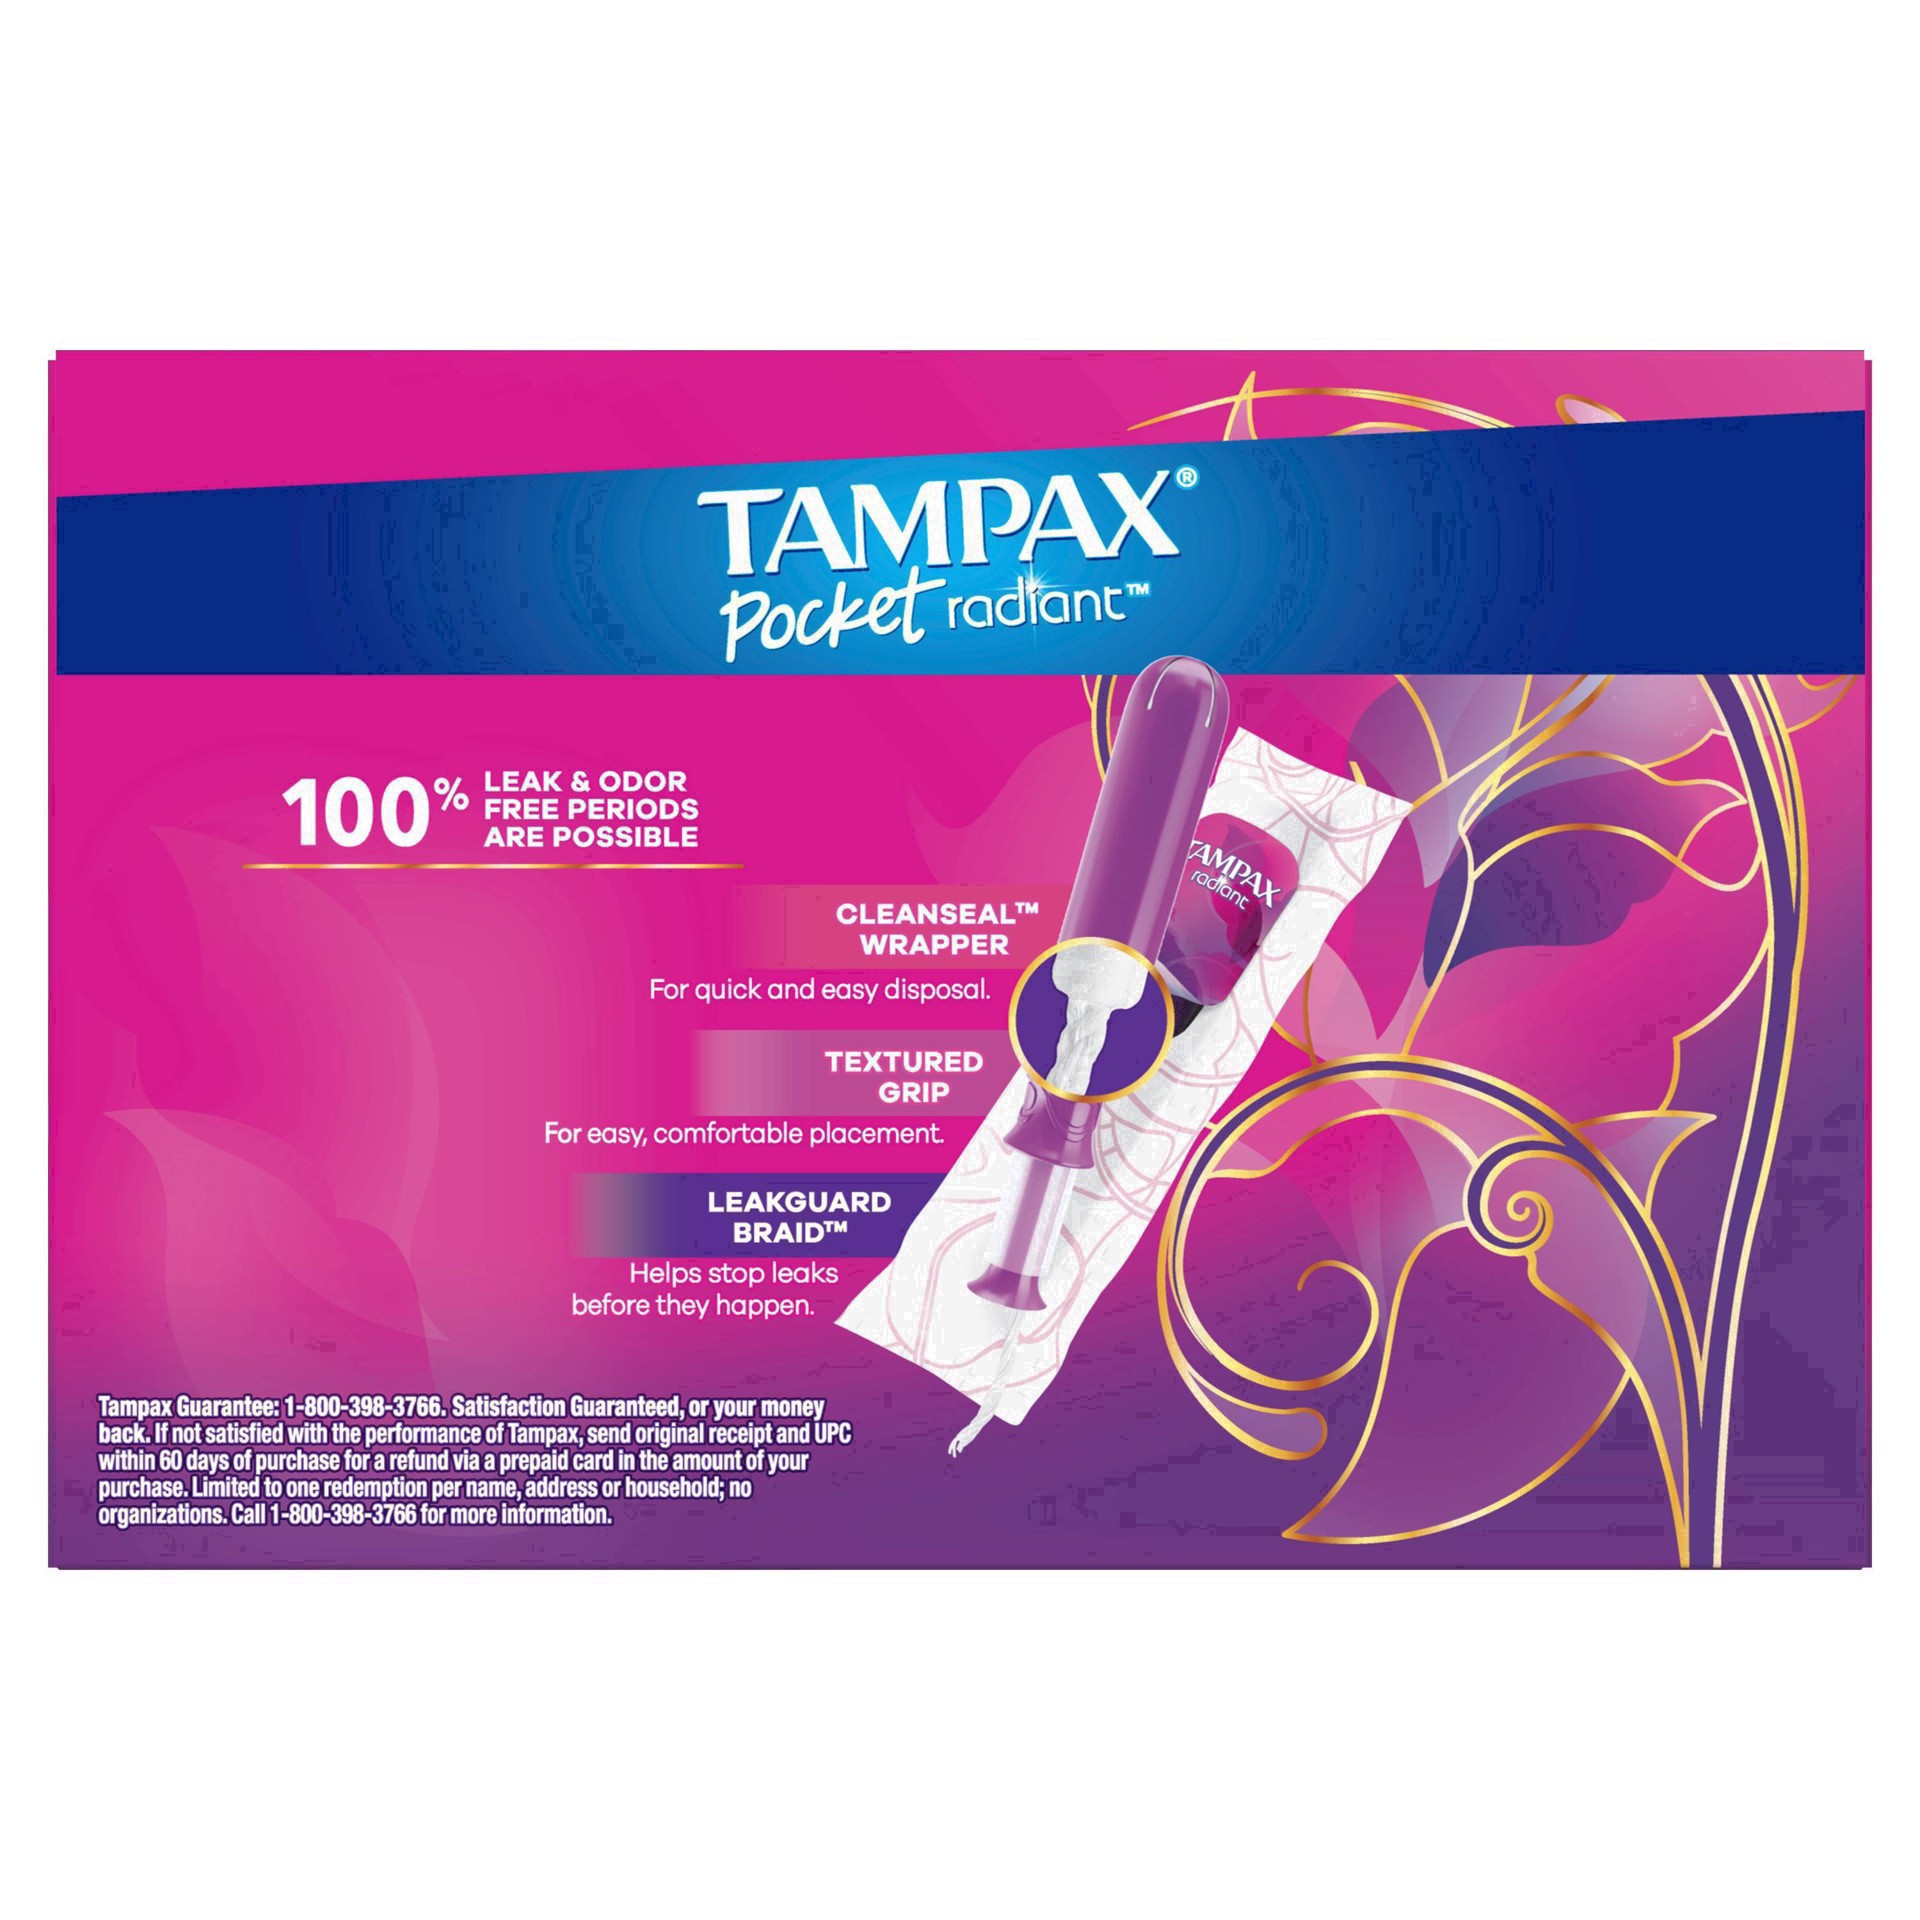 slide 23 of 94, Tampax Pocket Radiant Compact Plastic Tampons, With LeakGuard Braid, Super Absorbency, Unscented, 28 Count, 28 ct